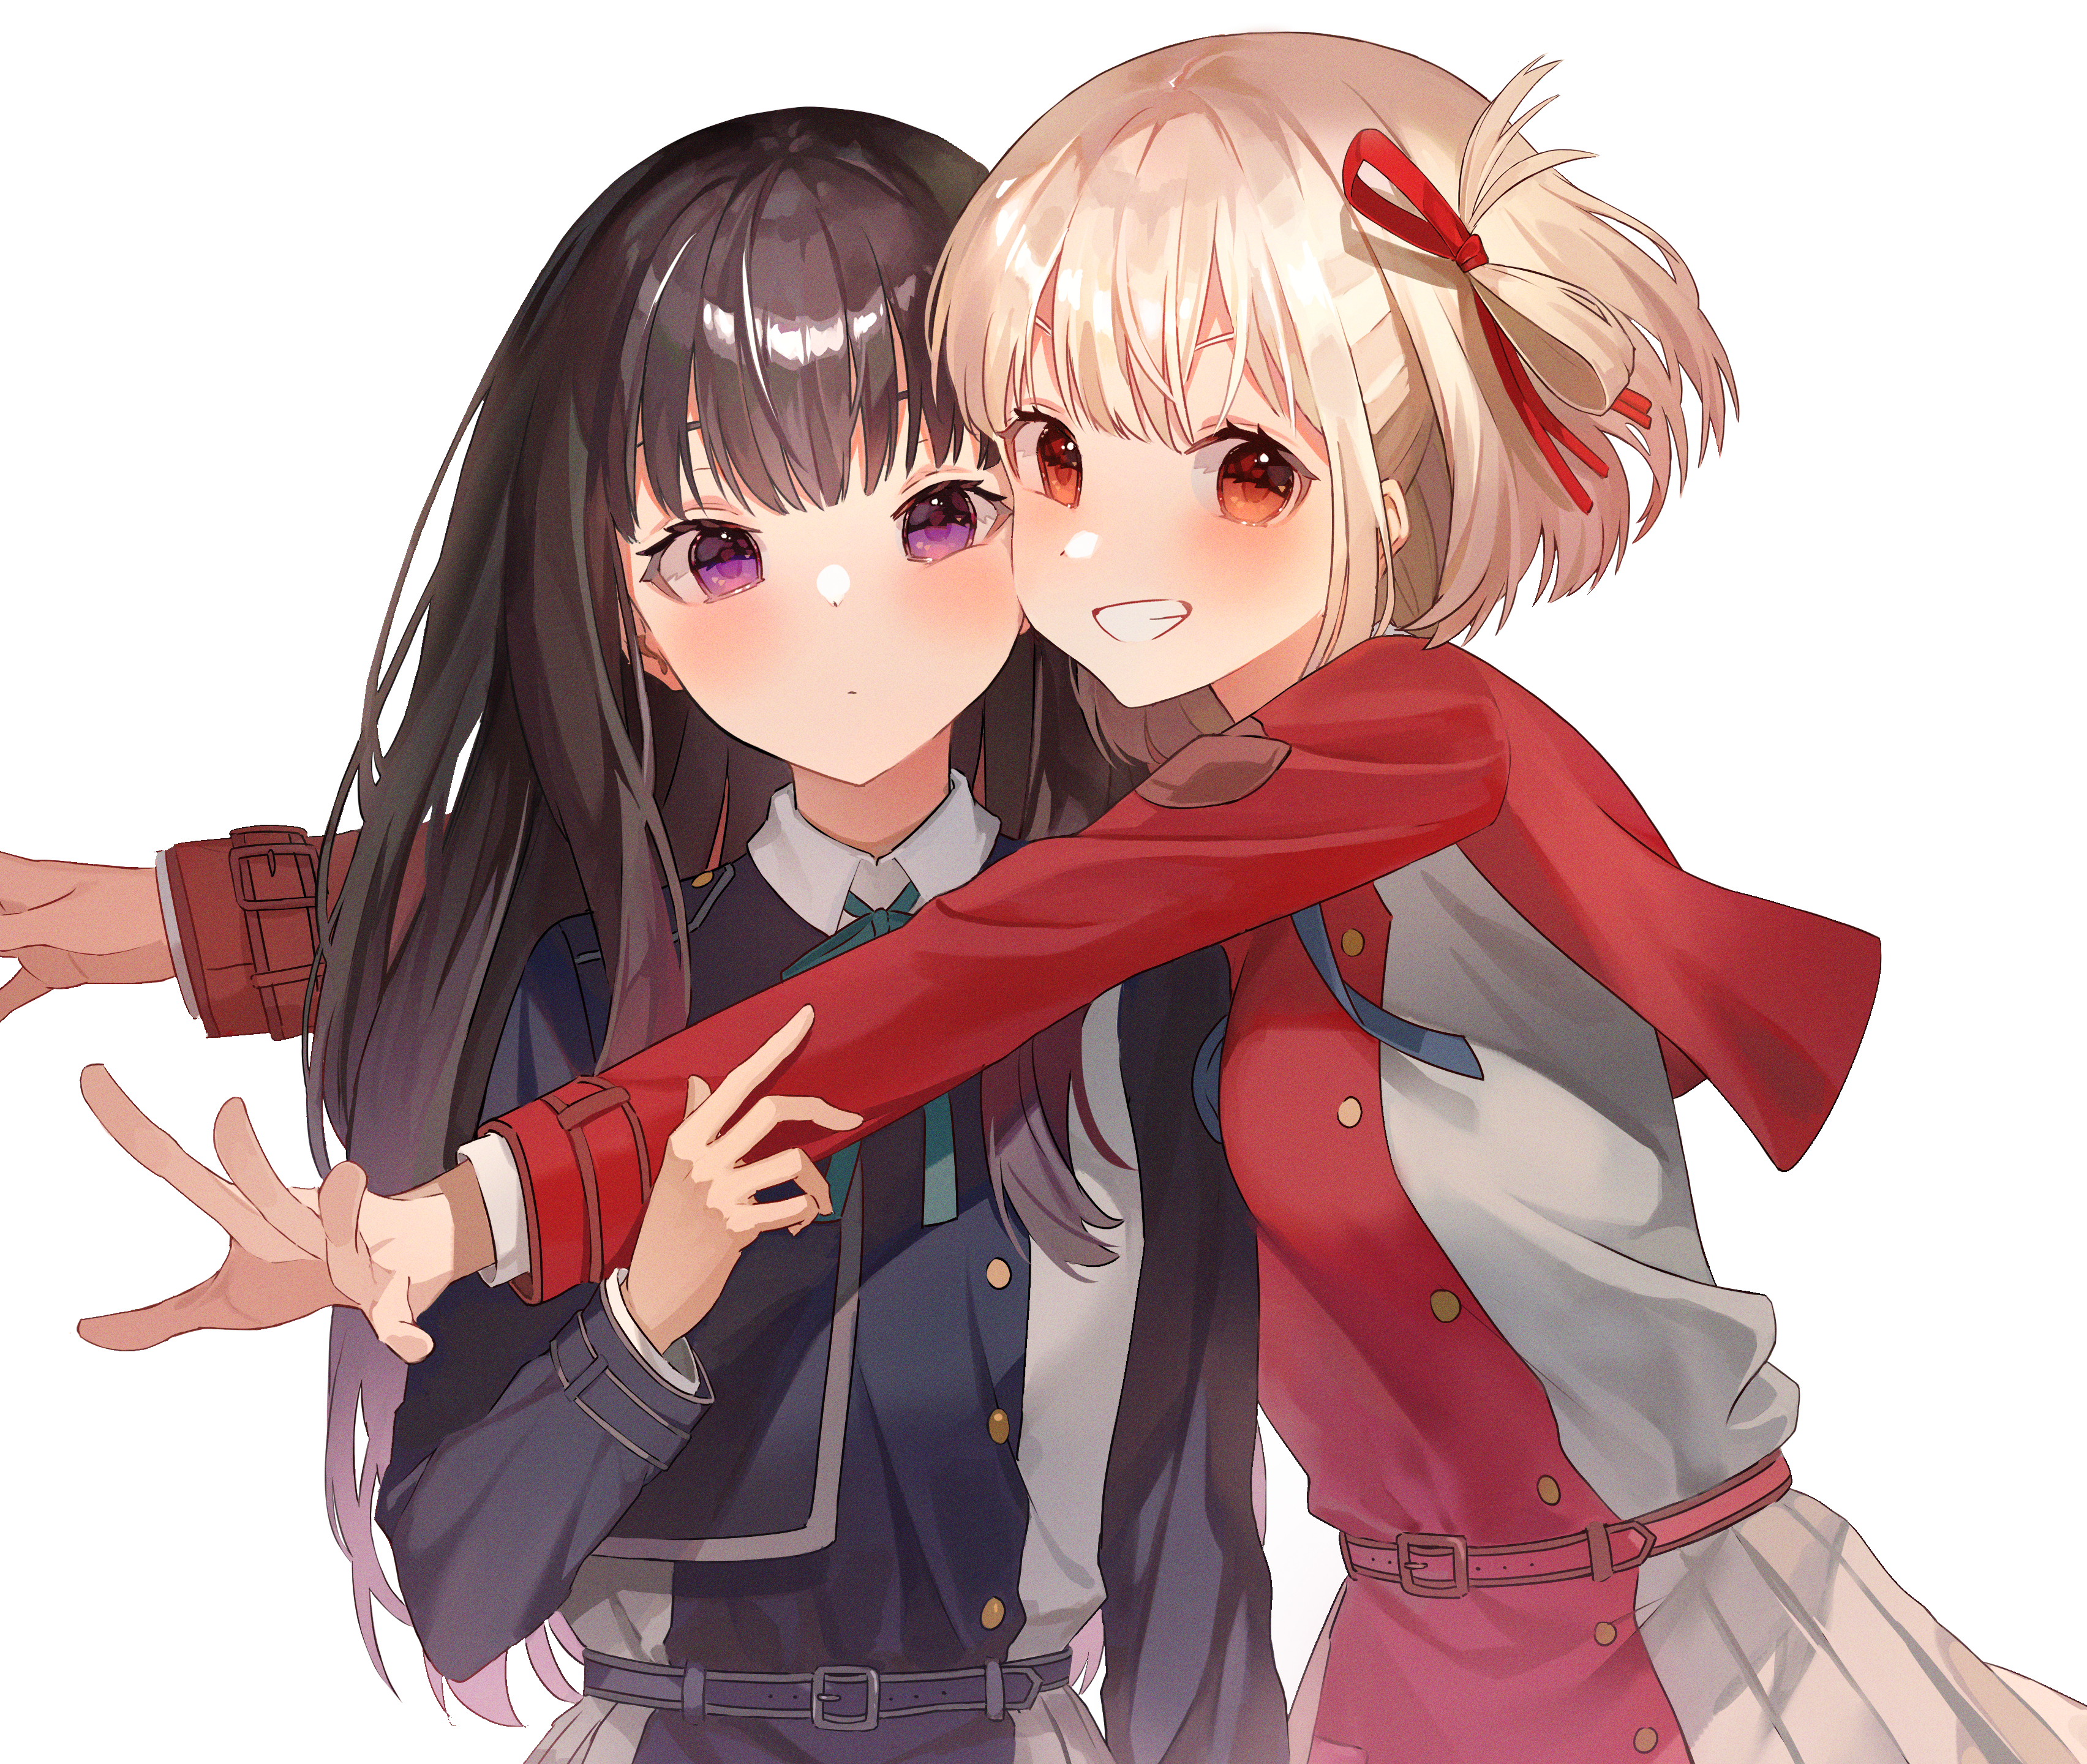 Anime,aesthetic,best friends,matching icons 1 2 by 4zuna on DeviantArt